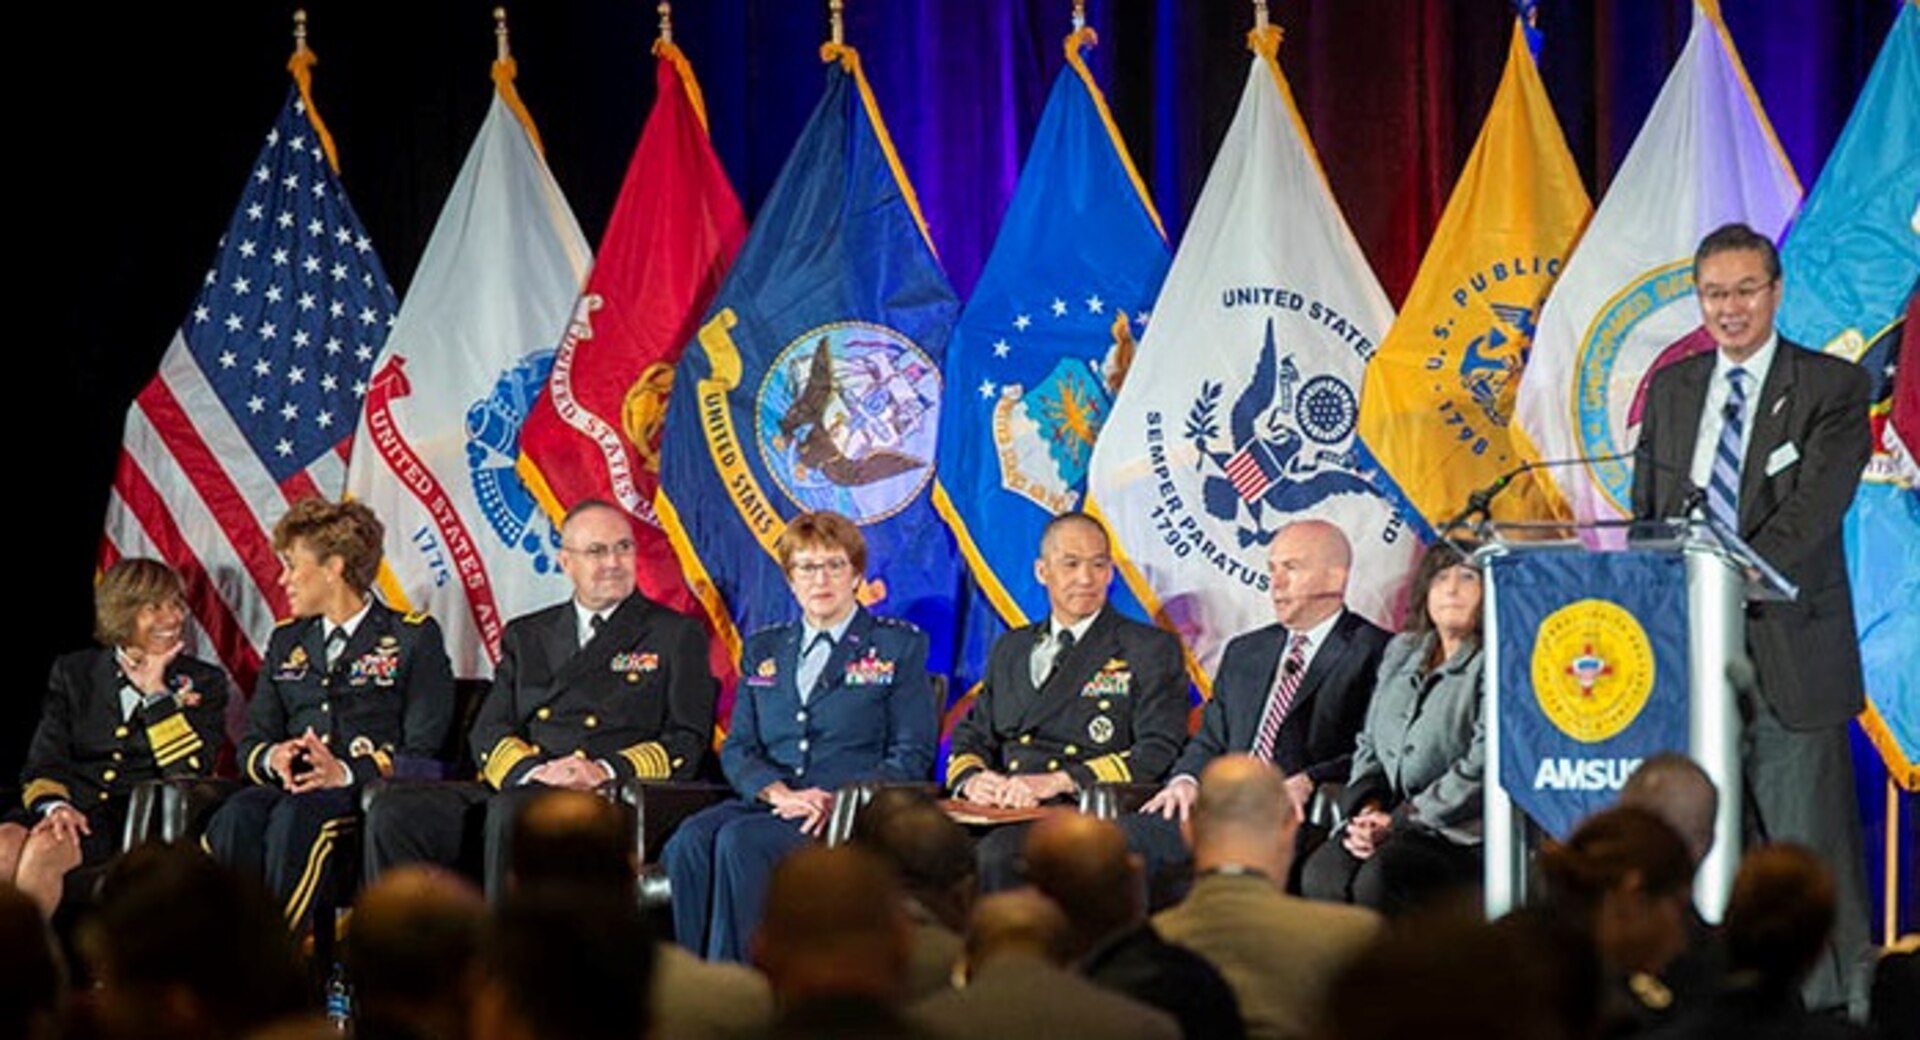 Dr. John Cho (far right), AMSUS executive director, introduces speakers (from left) Navy Vice Adm. Raquel Bono, Defense Health Agency director; Lt. Gen. Nadja West, Army Surgeon General; Vice Adm. Forrest Faison III, Navy Surgeon General; Lt. Gen. Dorothy Hogg, Air Force Surgeon General; Navy Rear Adm. Colin Chinn, Joint Staff surgeon, Dr. Richard Thomas, president of Uniformed Services University of the Health Sciences; and Dr. Terry Adirim, Deputy Assistant Secretary of Defense for Health Services Policy and Oversight.